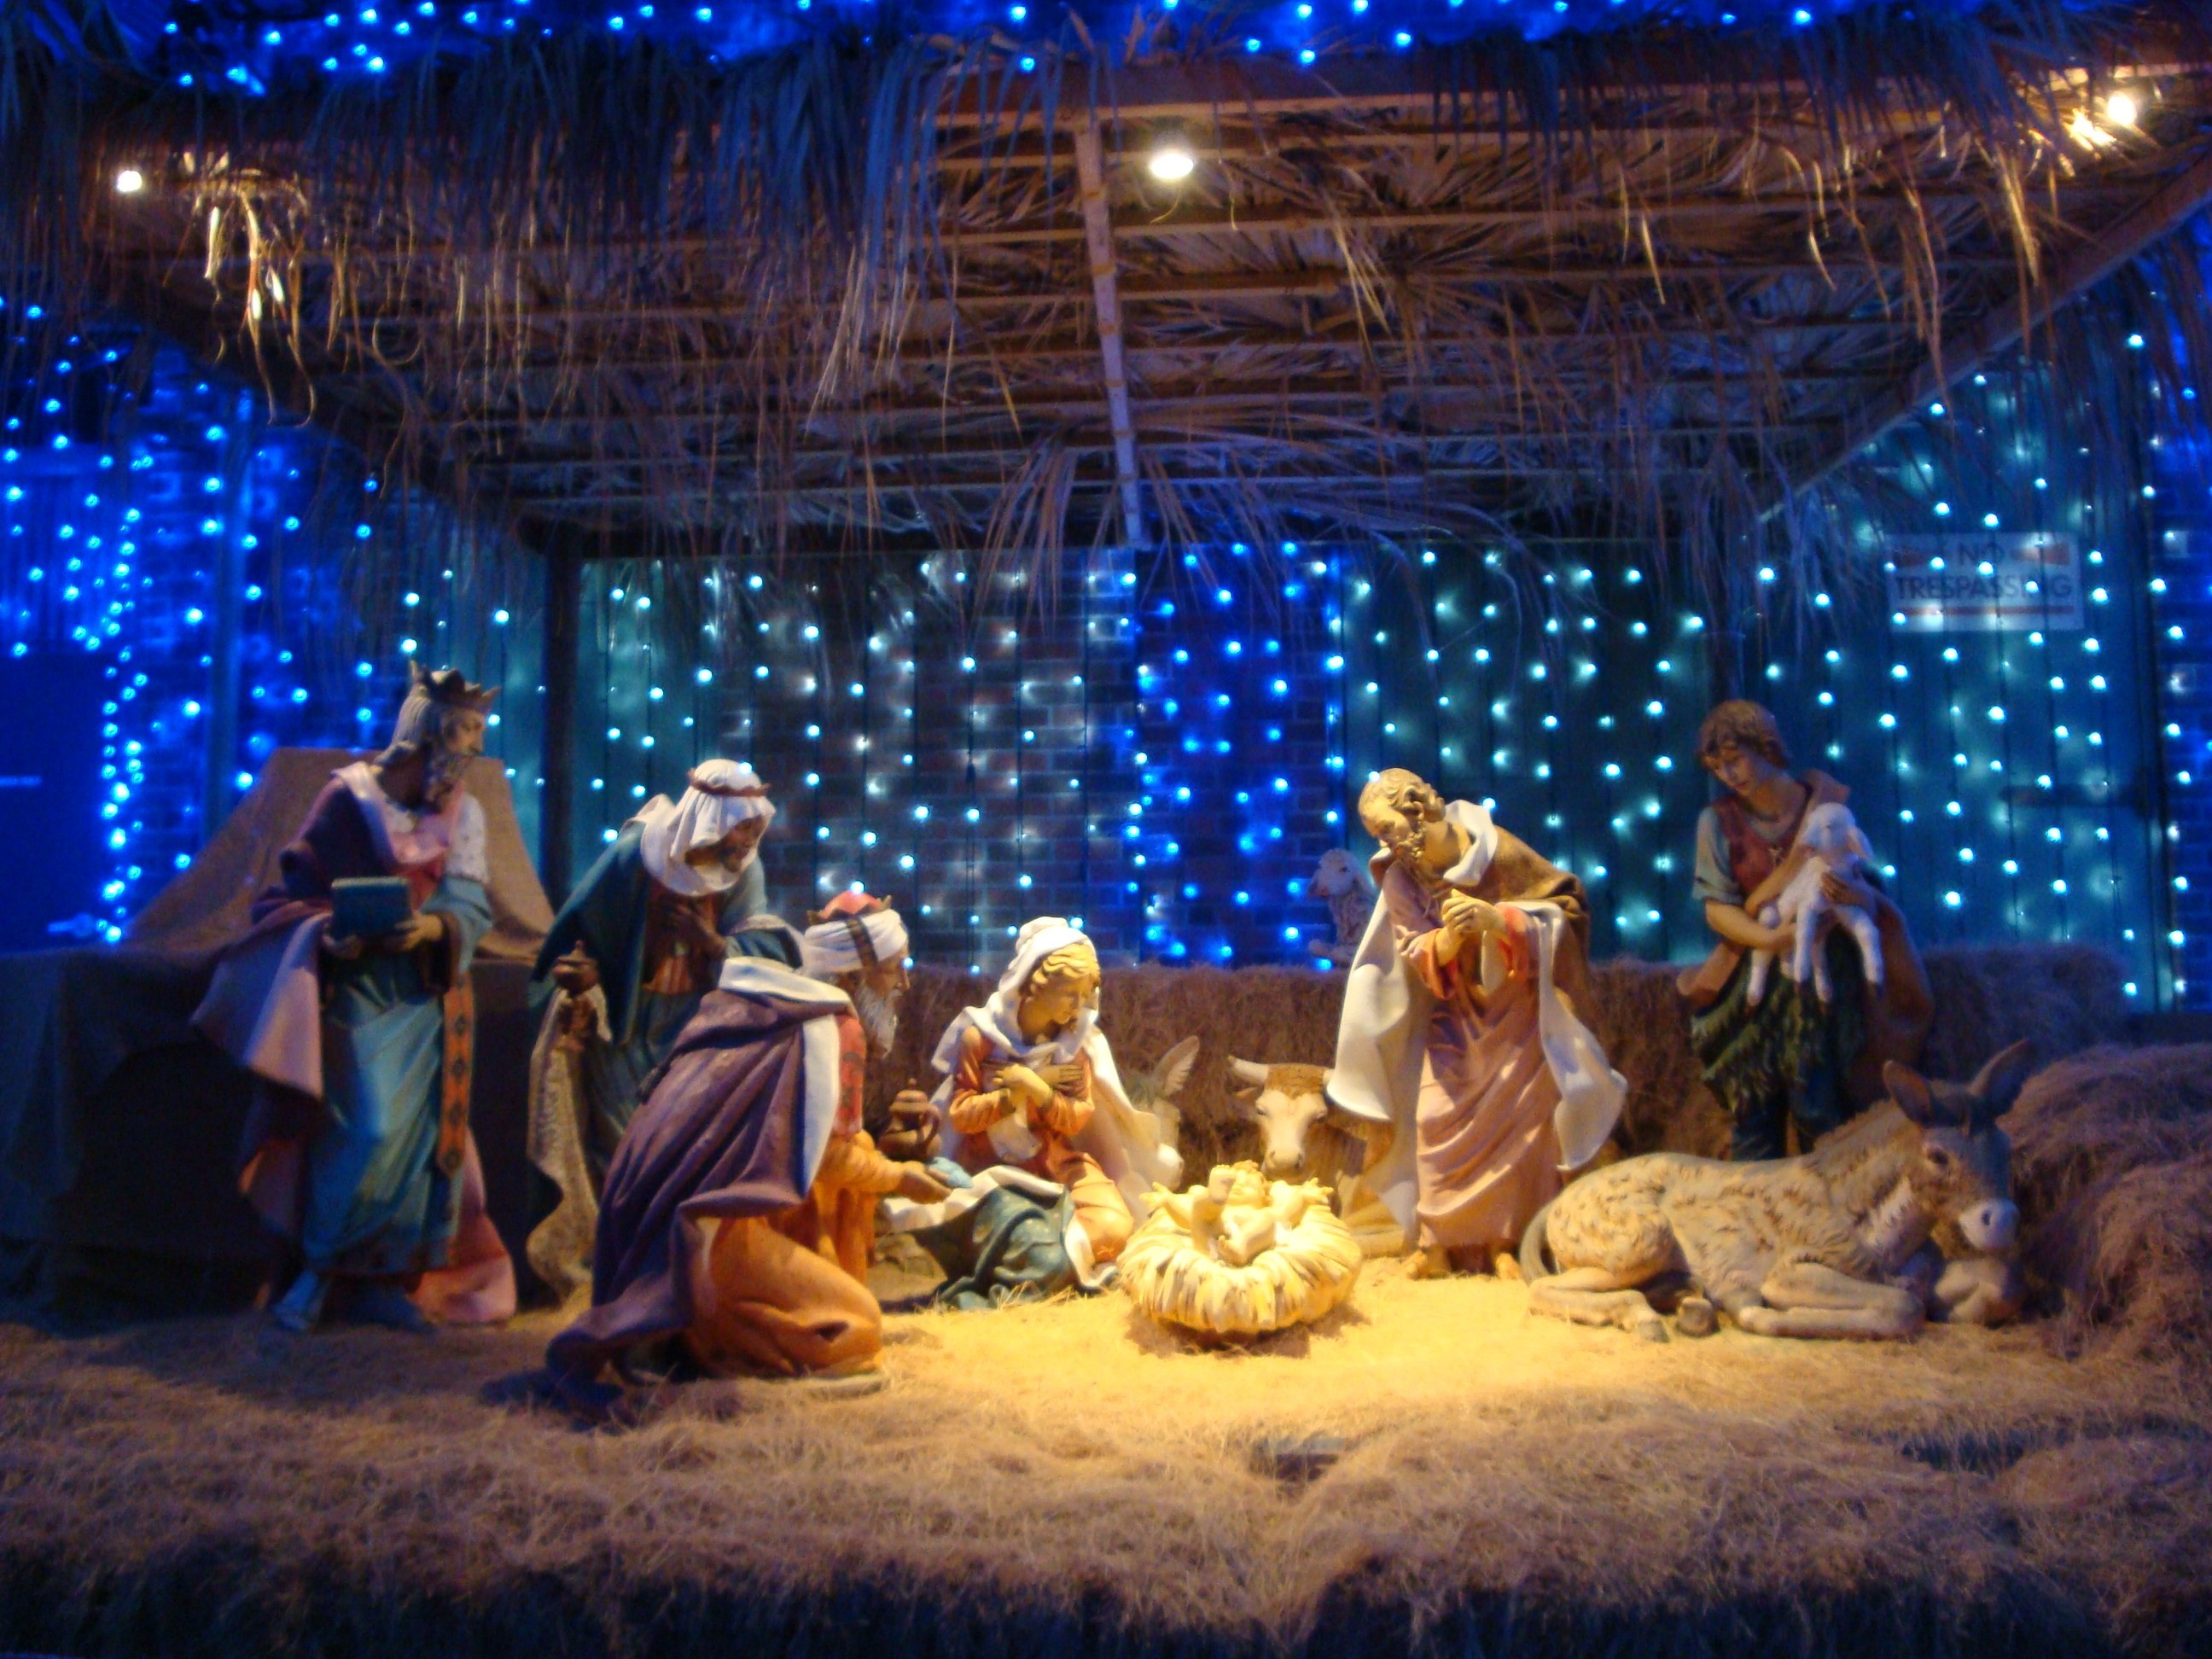 2592x1944 ... Cool Manger Scene Clipart Wallpaper Free Wallpaper For Desktop and  Mobile in All Resolutions Free Download